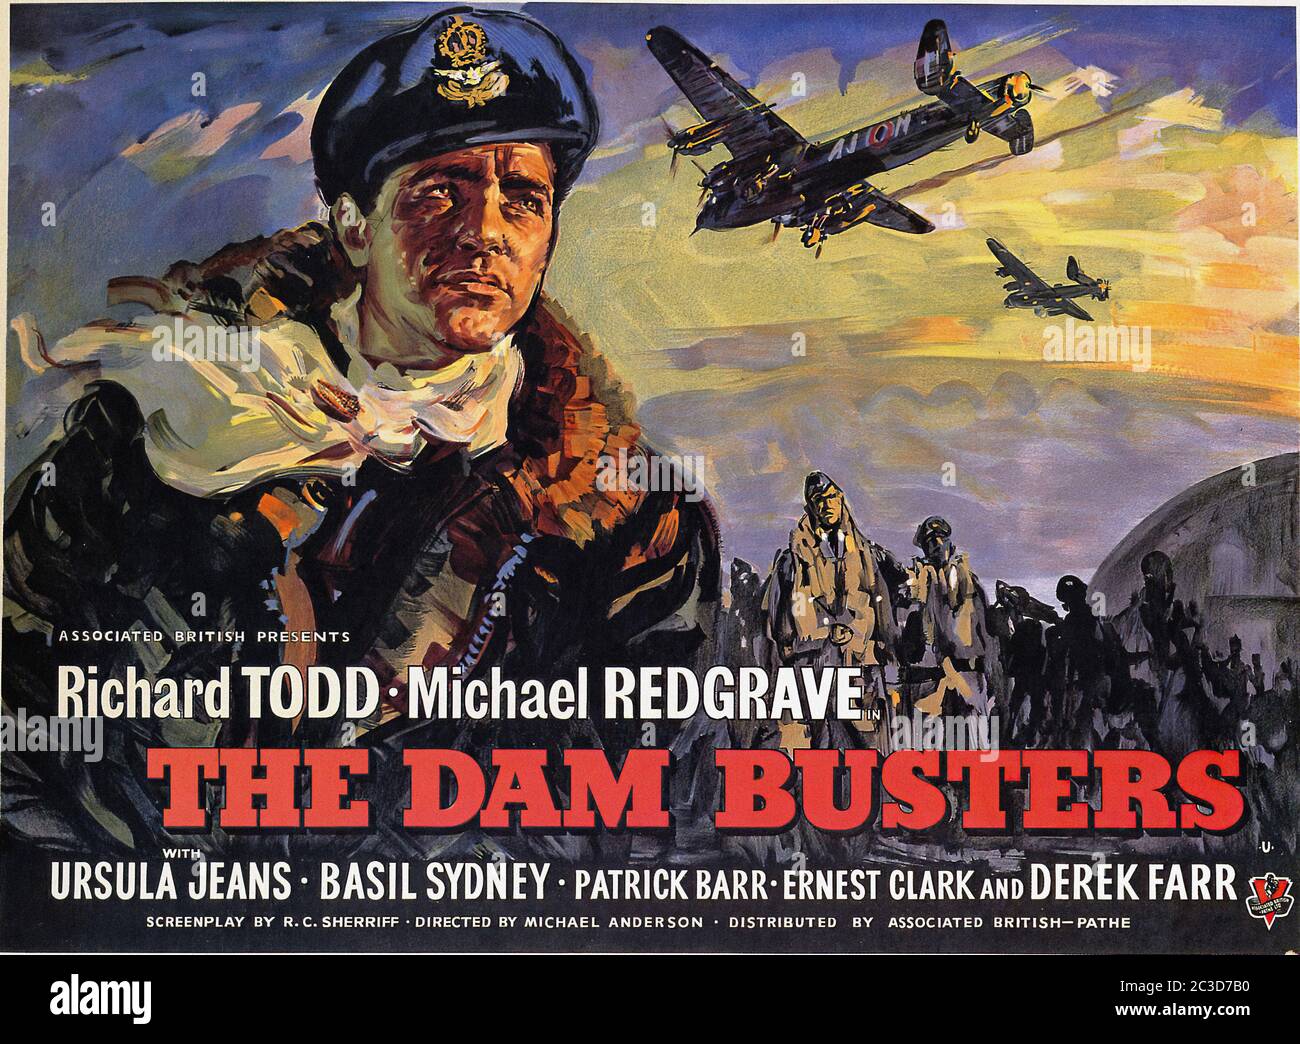 The Dam Busters - Vintage Movie Poster Stock Photo